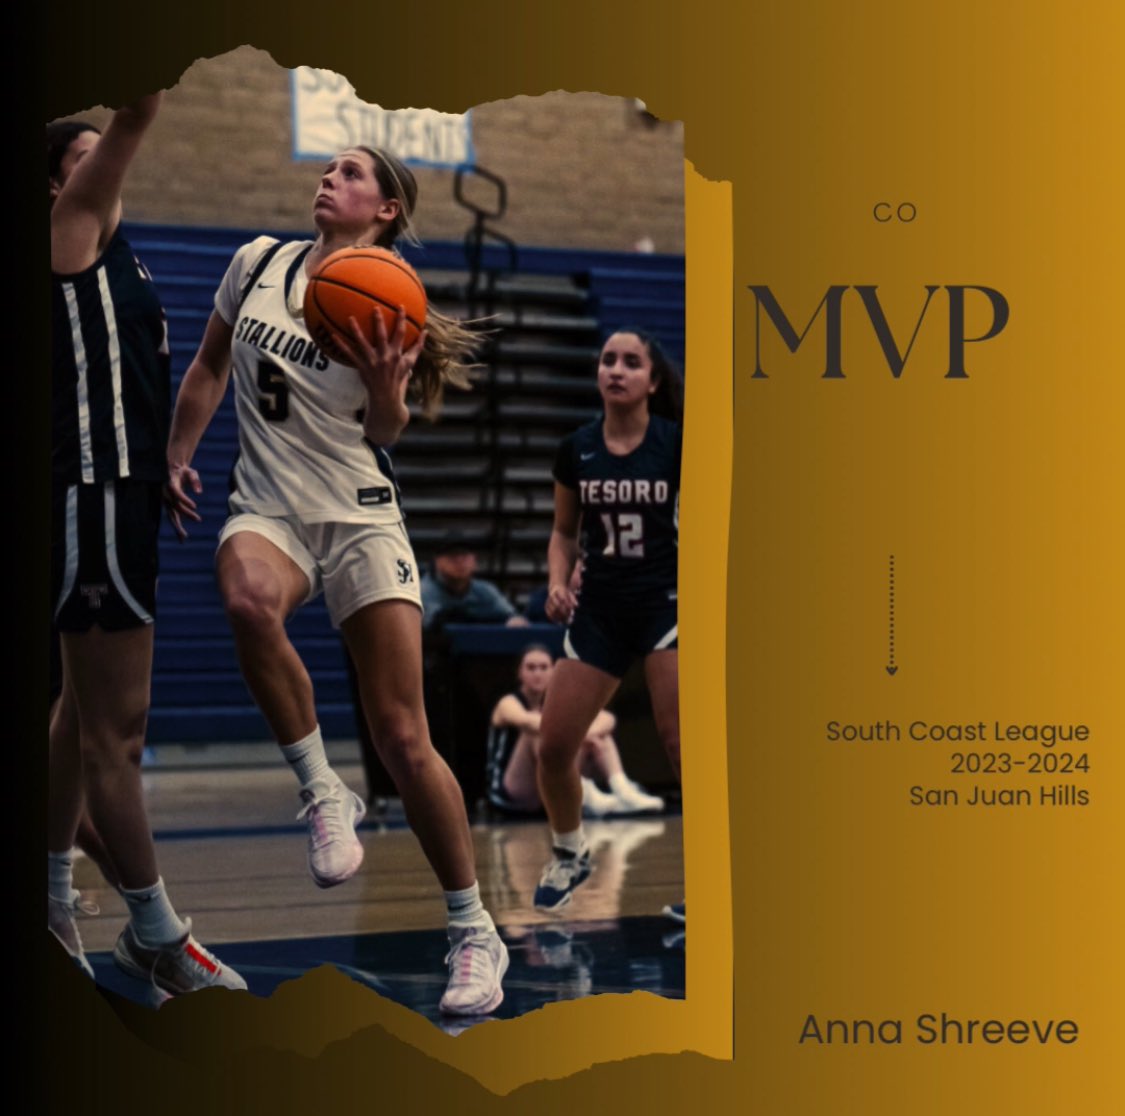 Anna Shreeve has been selected as co MVP of the South Coast League! A dominant, destructive player on both ends-her coach says may be the most gifted in school history. She avg 19pts/6reb/4.5stl on her way to: -League title -D1 playoff win -573 pts-school record -1279 career pts